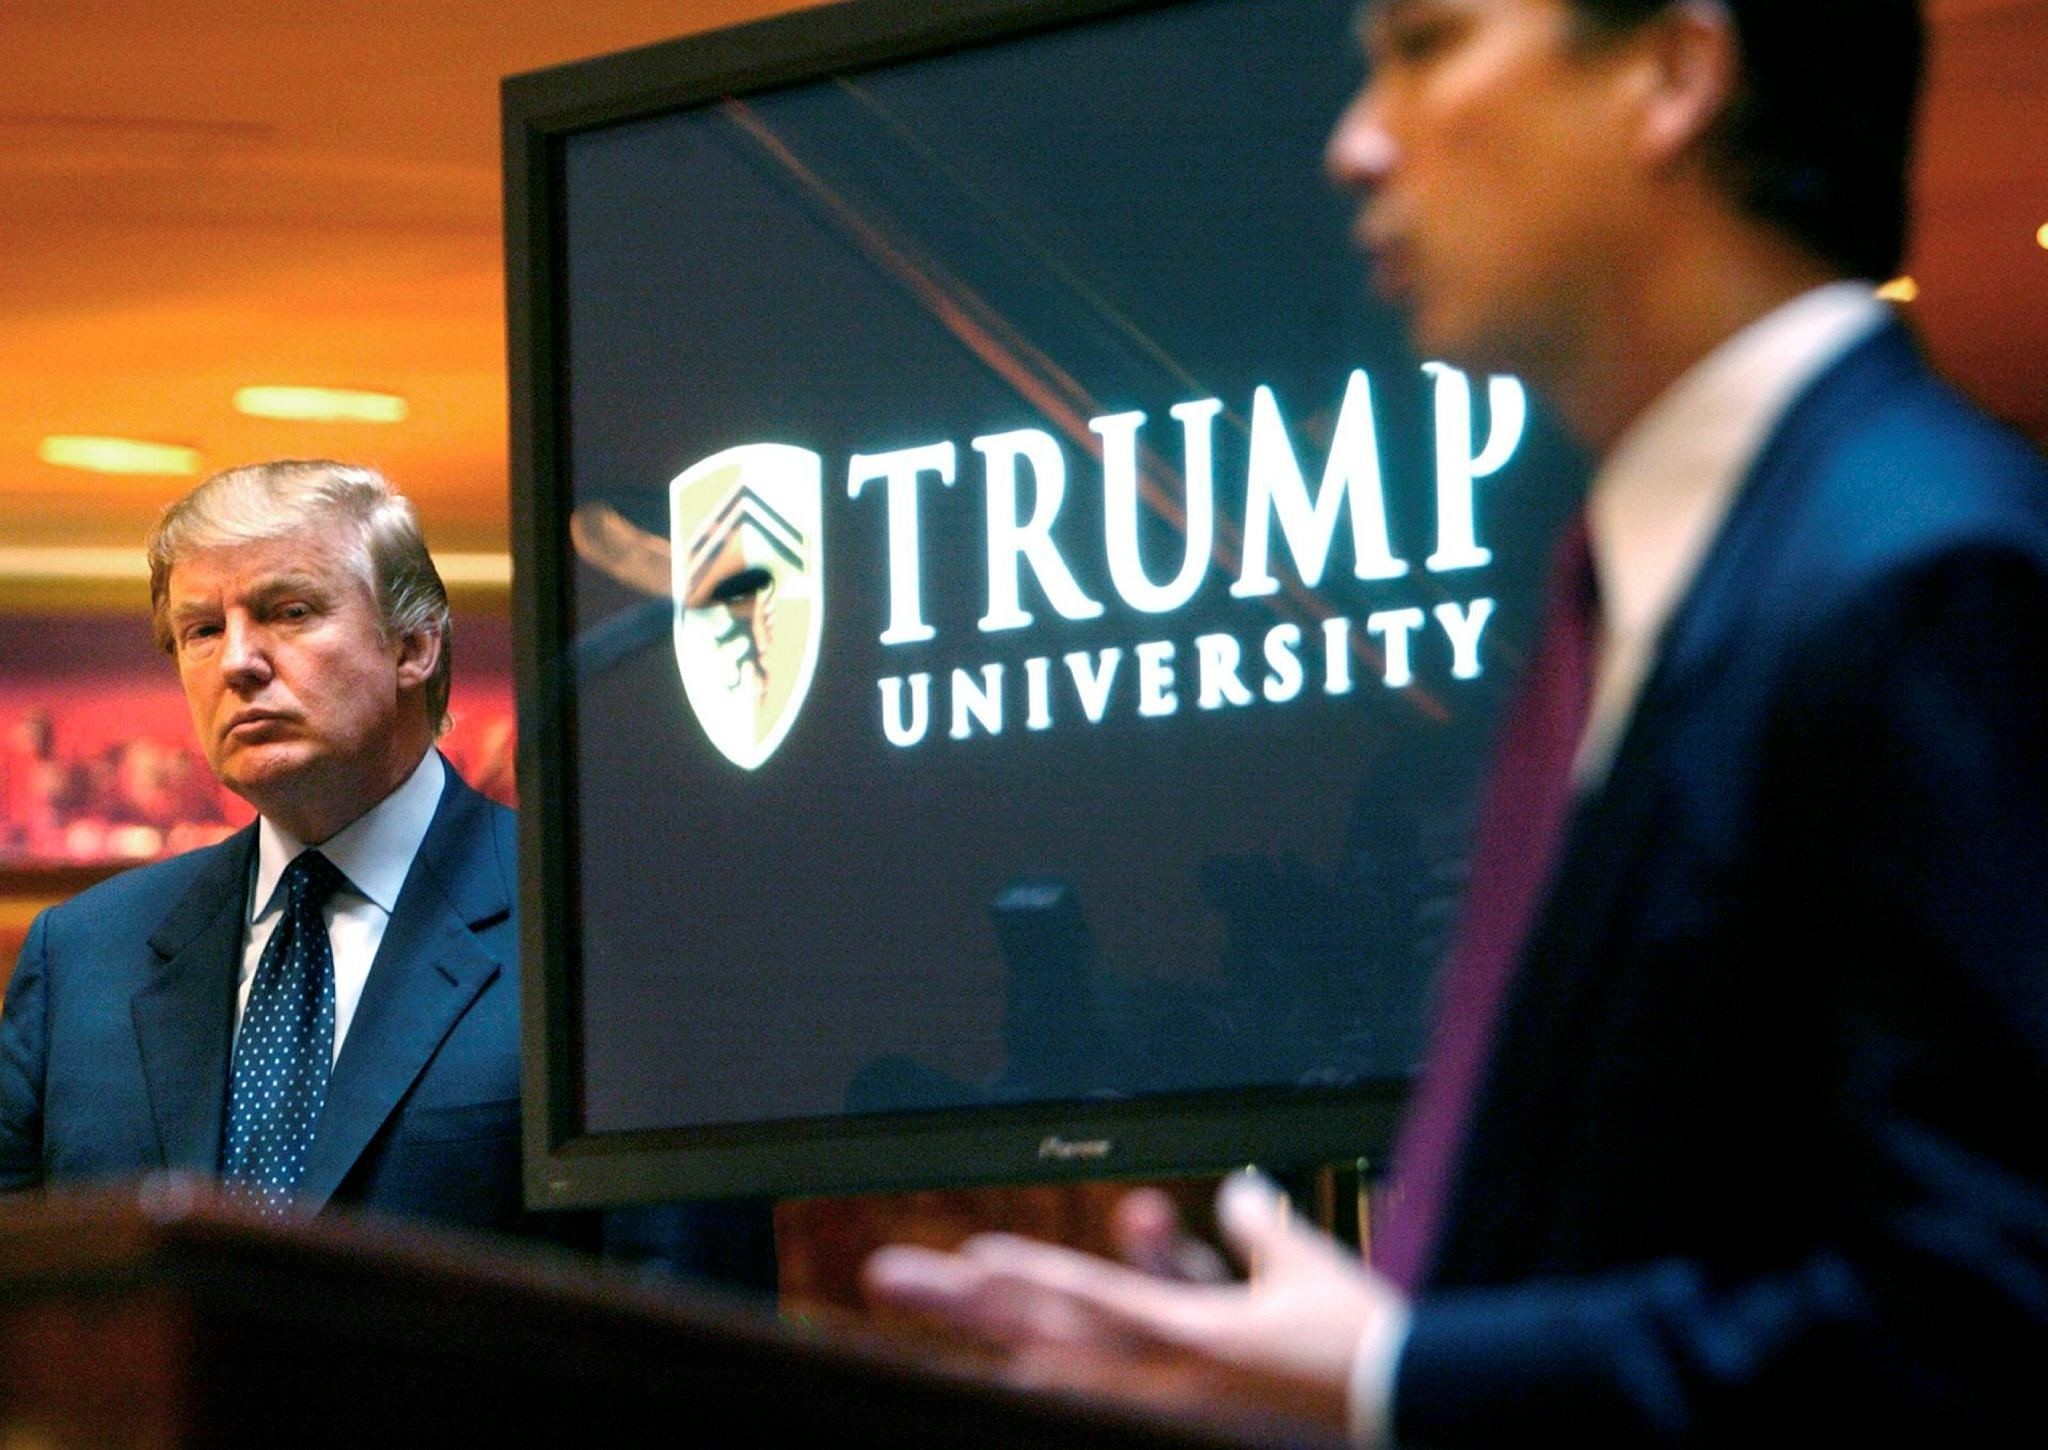 Donald Trump, left, listens as Michael Sexton introduces him at a news conference in New York where he announced the establishment of Trump University. (AP Photo)